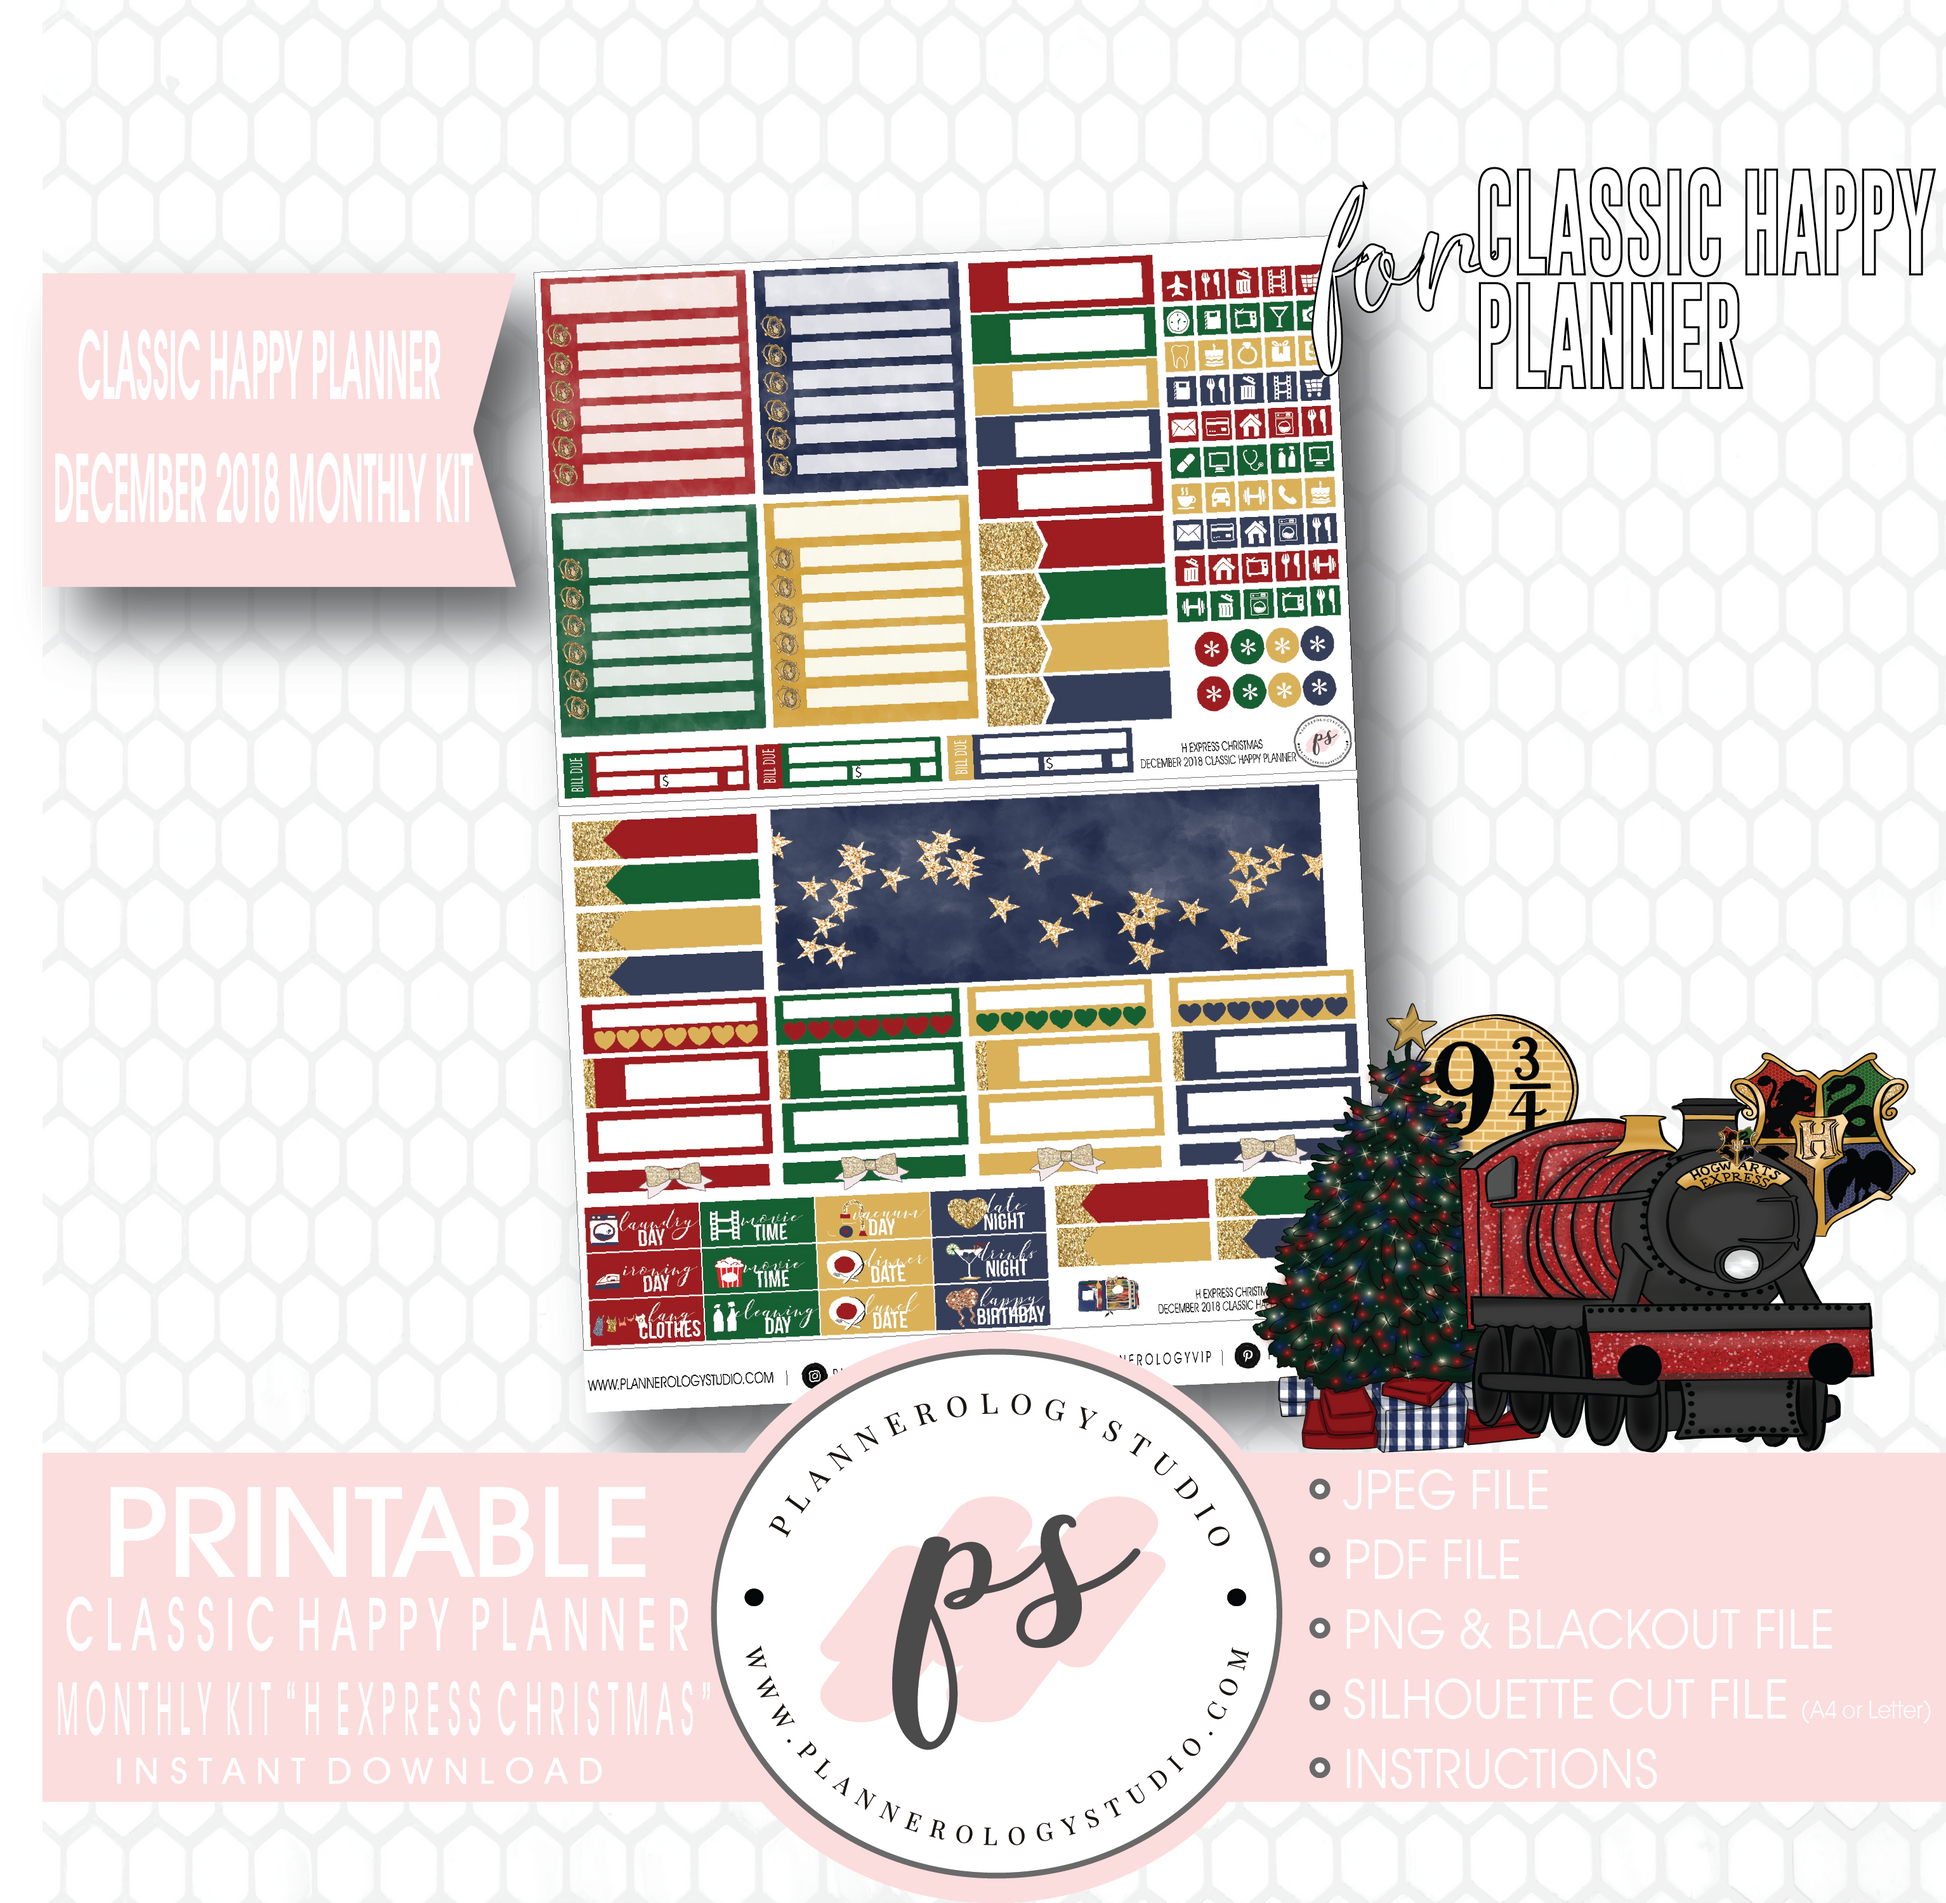 H Express Christmas (Harry Potter) Christmas December 2018 Monthly View Kit Digital Printable Planner Stickers (for use with Classic Happy Planner) - Plannerologystudio